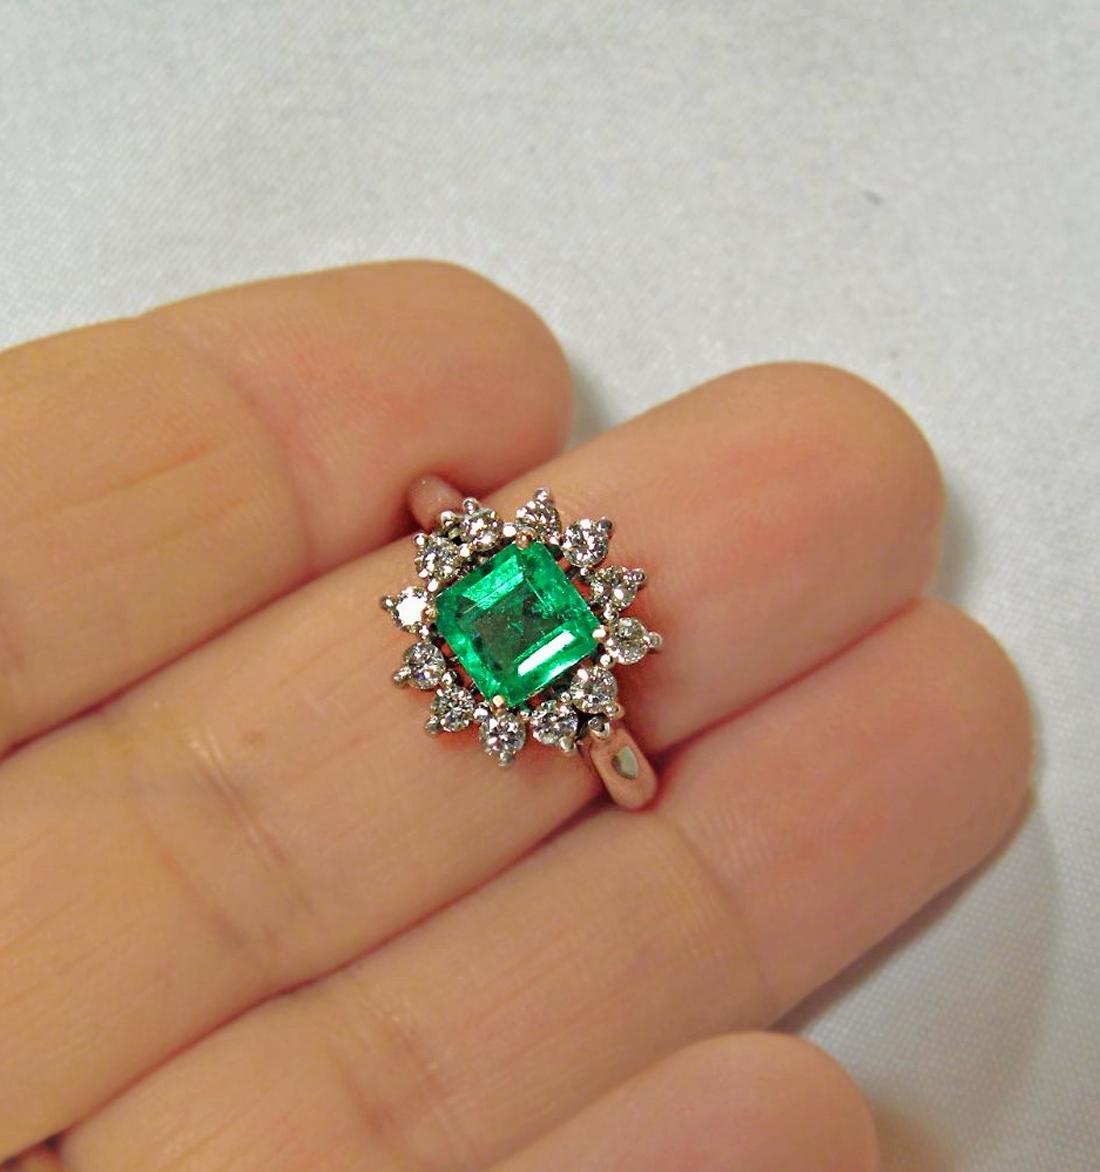 Stunning Engagement Wedding Ring Set wit a natural Colombian emerald, square cut, medium fine AAA++ green color, VS in clarity. Total emerald weight :1.09 carats. Accented with natural white diamonds G/VS, 0.63 carats
Emerald measurements: 6.70 x